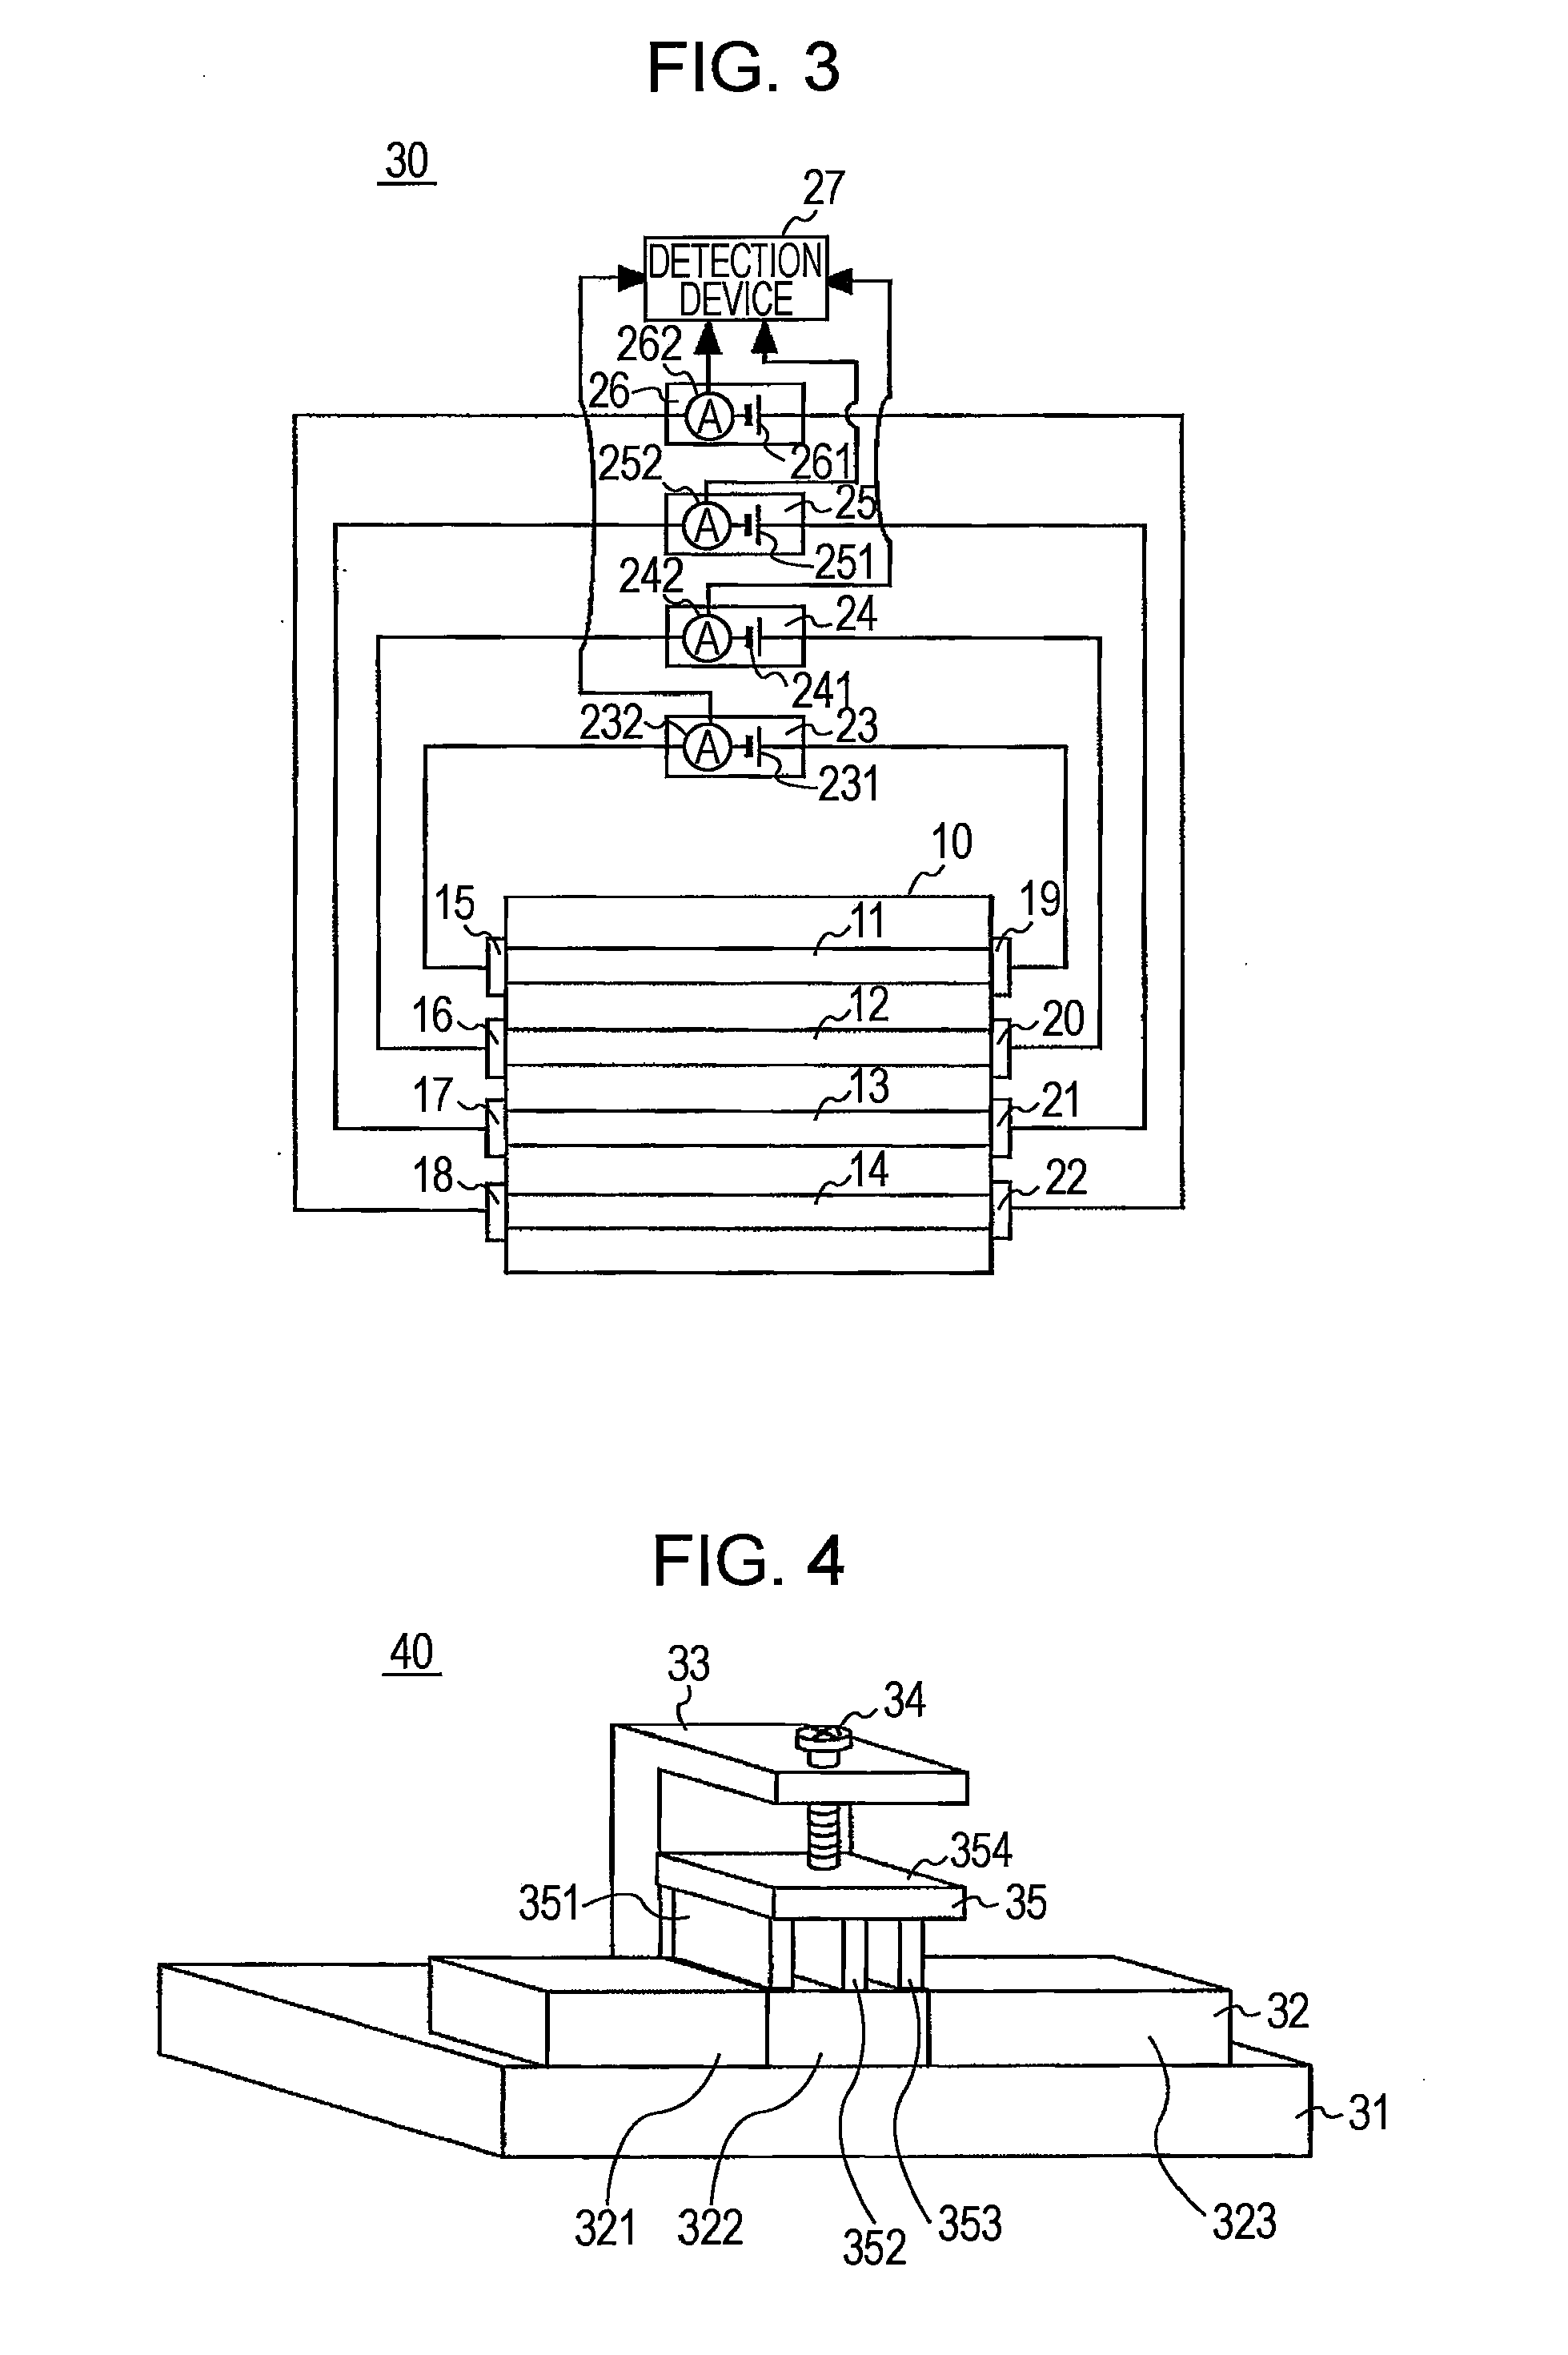 Pressure detection apparatus, josephson device, and superconducting quantum interference device that include superconductor thin film that undergoes transition from superconductor to insulator by pressure